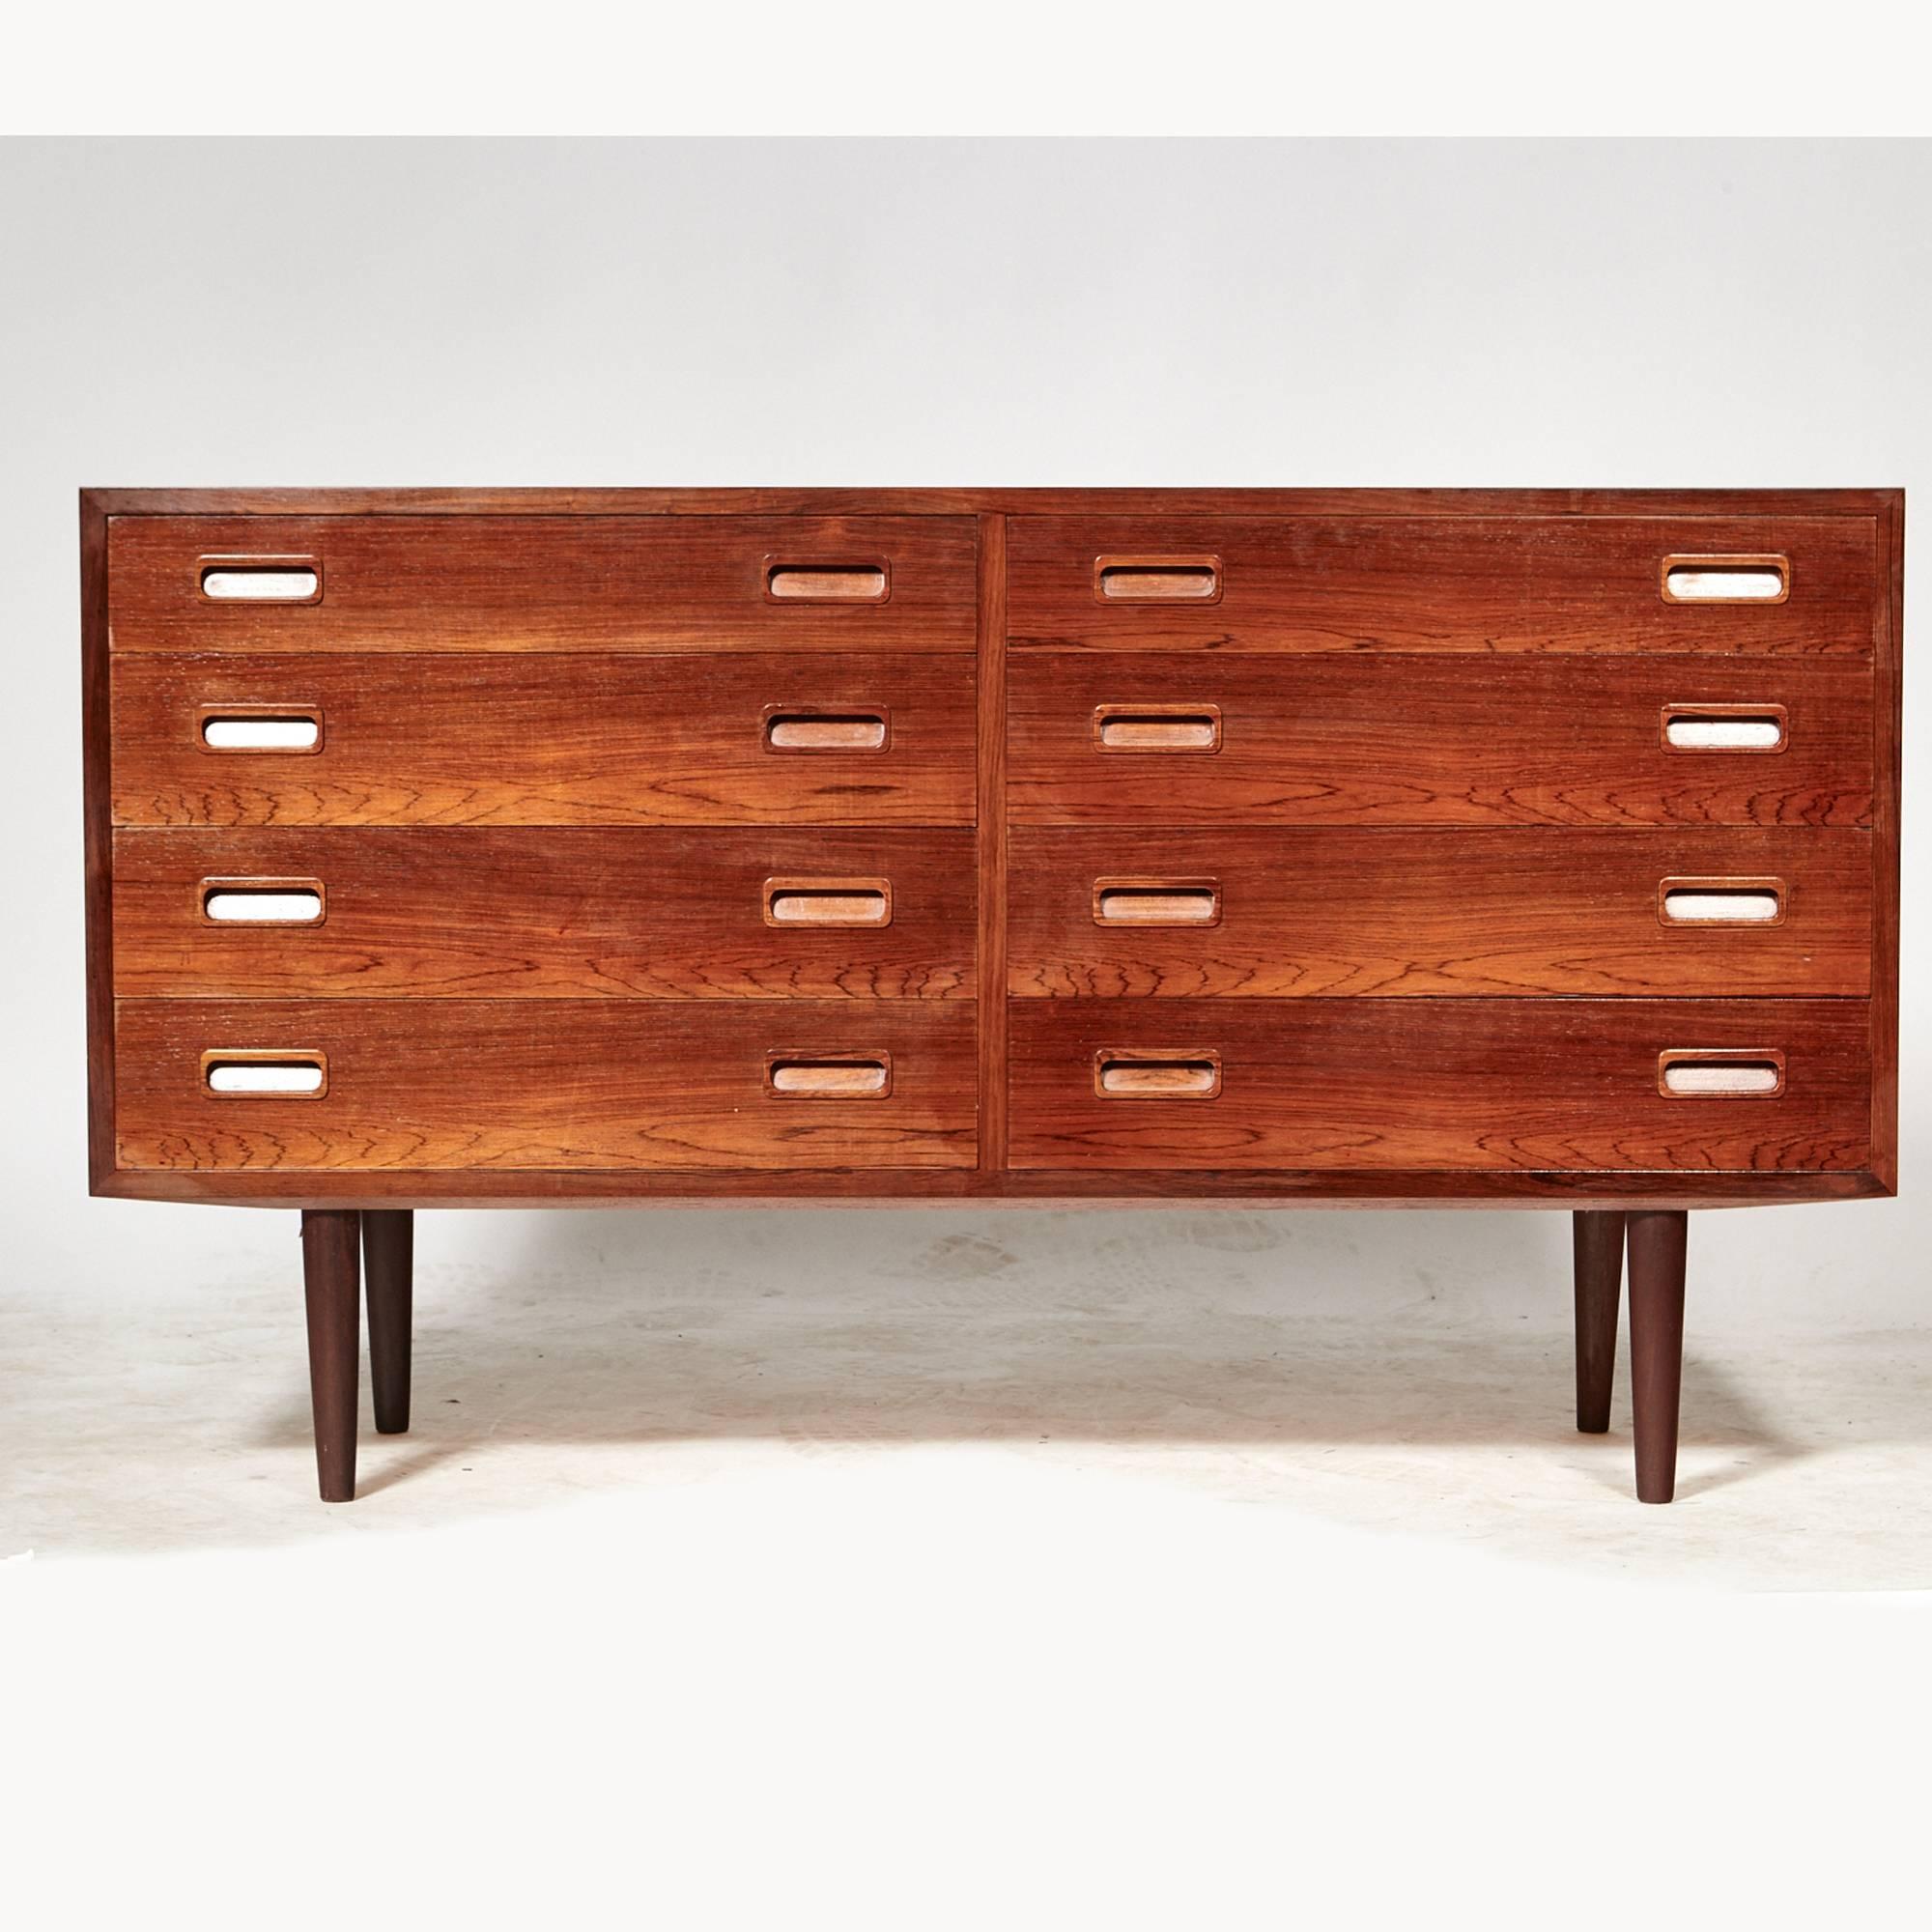 Brazilian rosewood chest of drawers designed in Denmark by Poul Hundevad, 1960s. The chest has eight drawers with inset pulls. Marked.